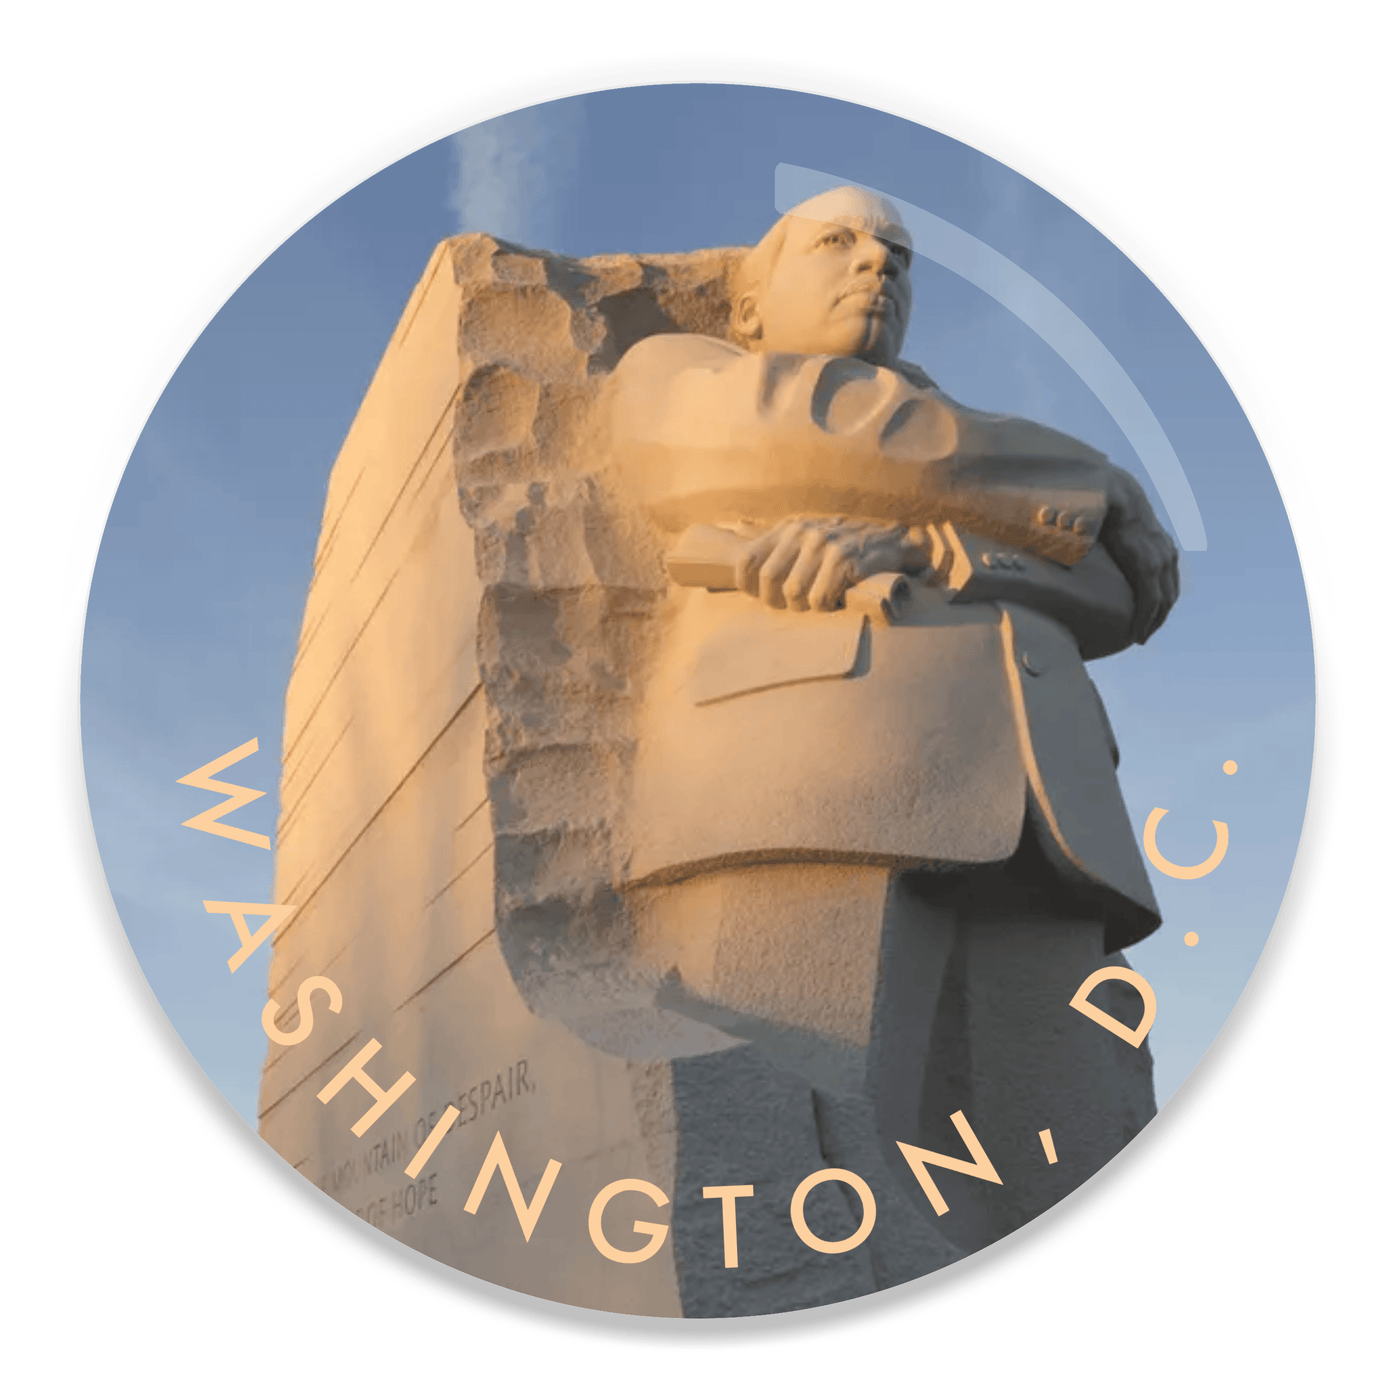 2.25 inch round colorful magnet with image of the martin Luther king jr memorial in Washington dc